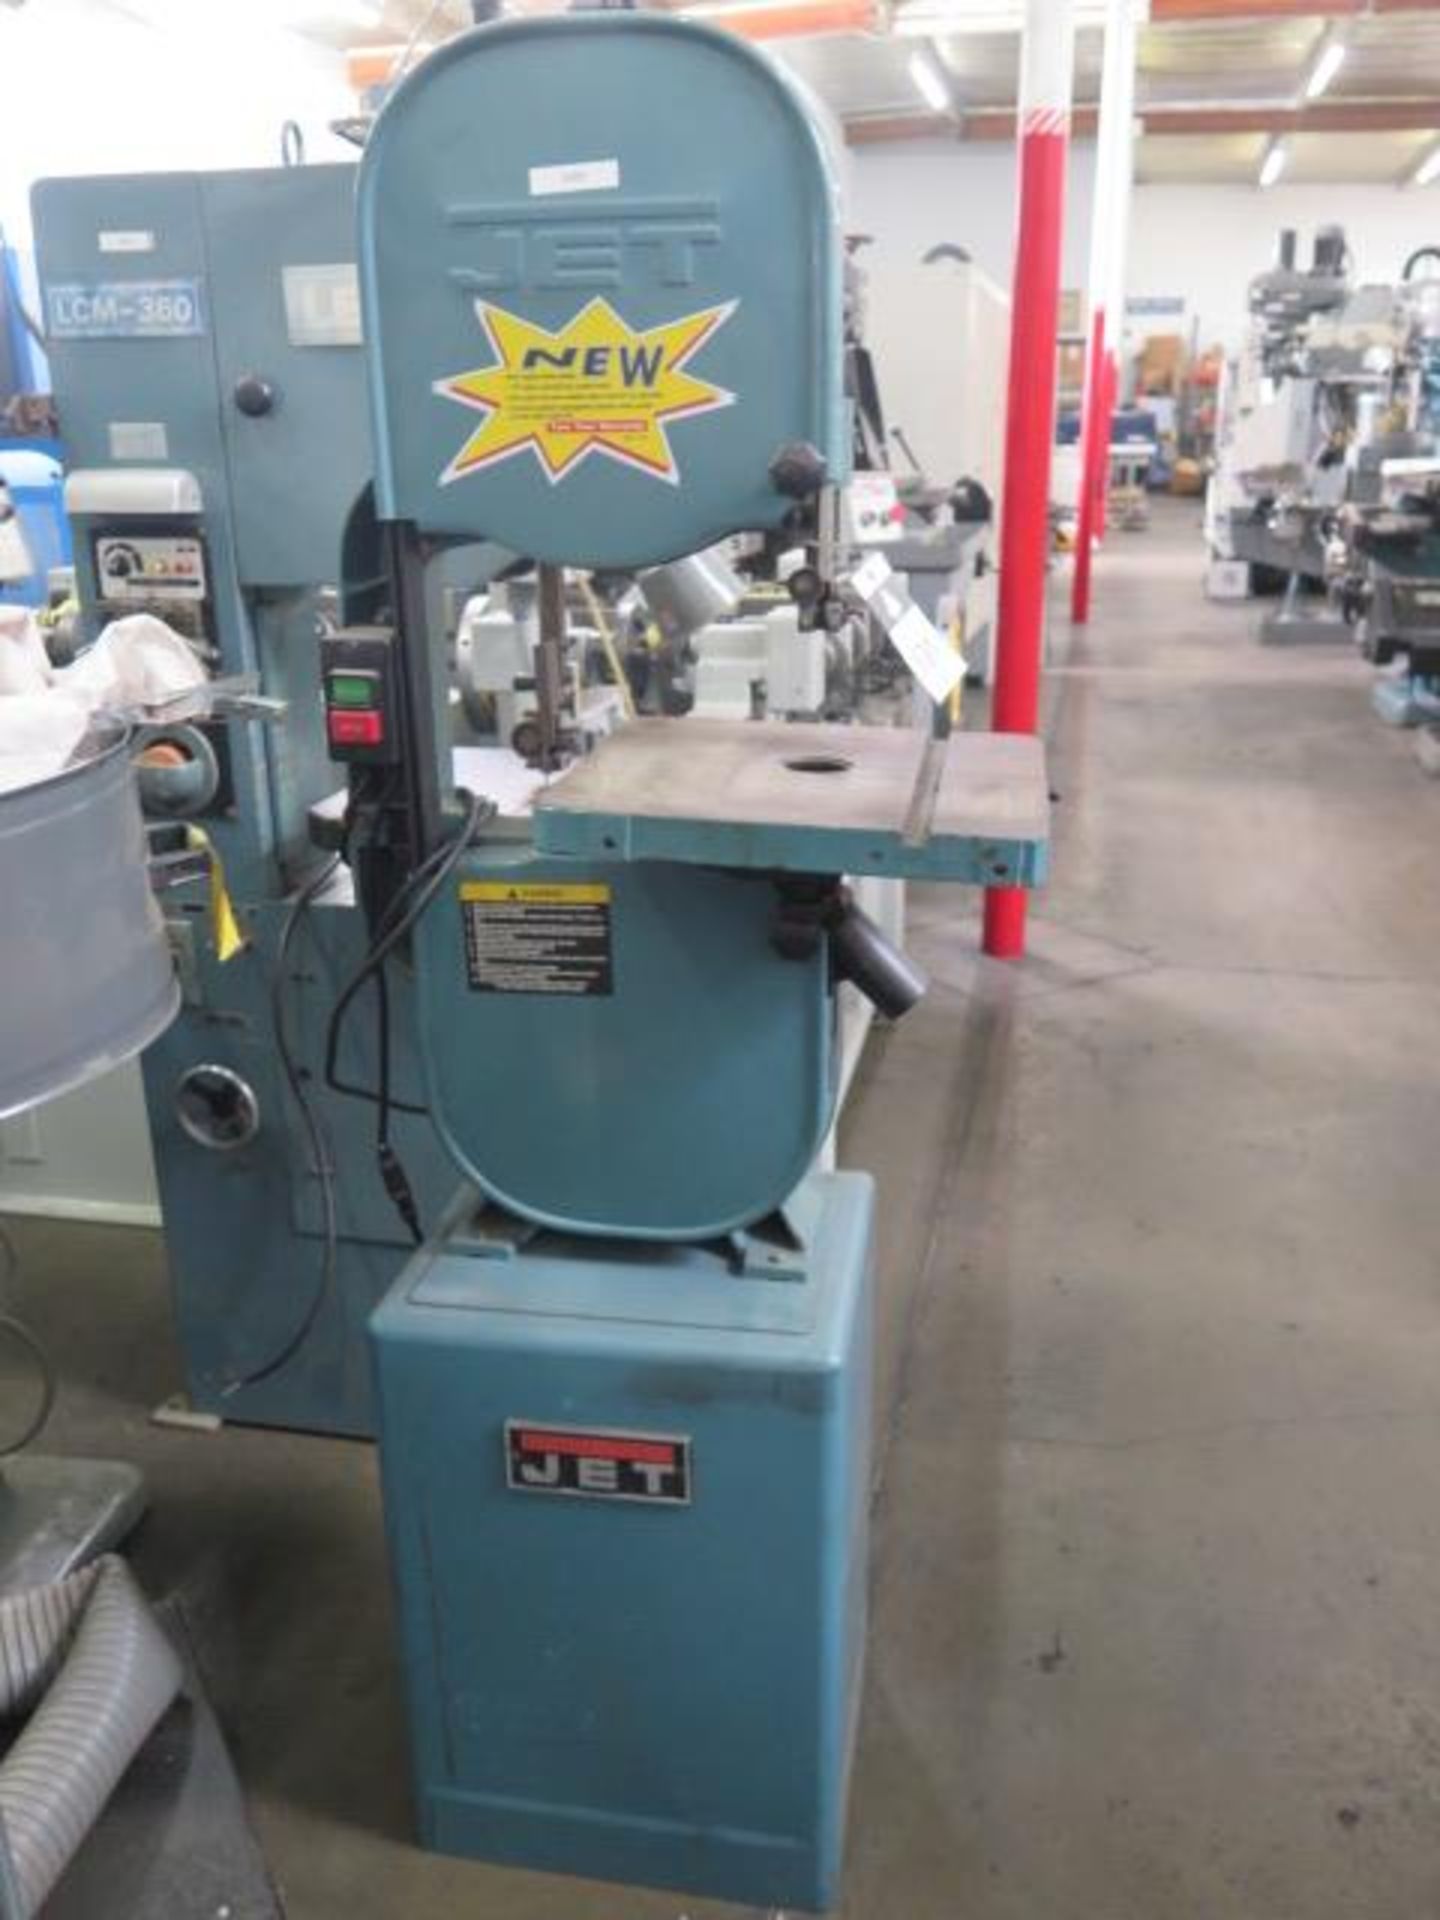 Jet 14" Vertical Band Saw s/n WBS-14 (SOLD AS-IS - NO WARRANTY)